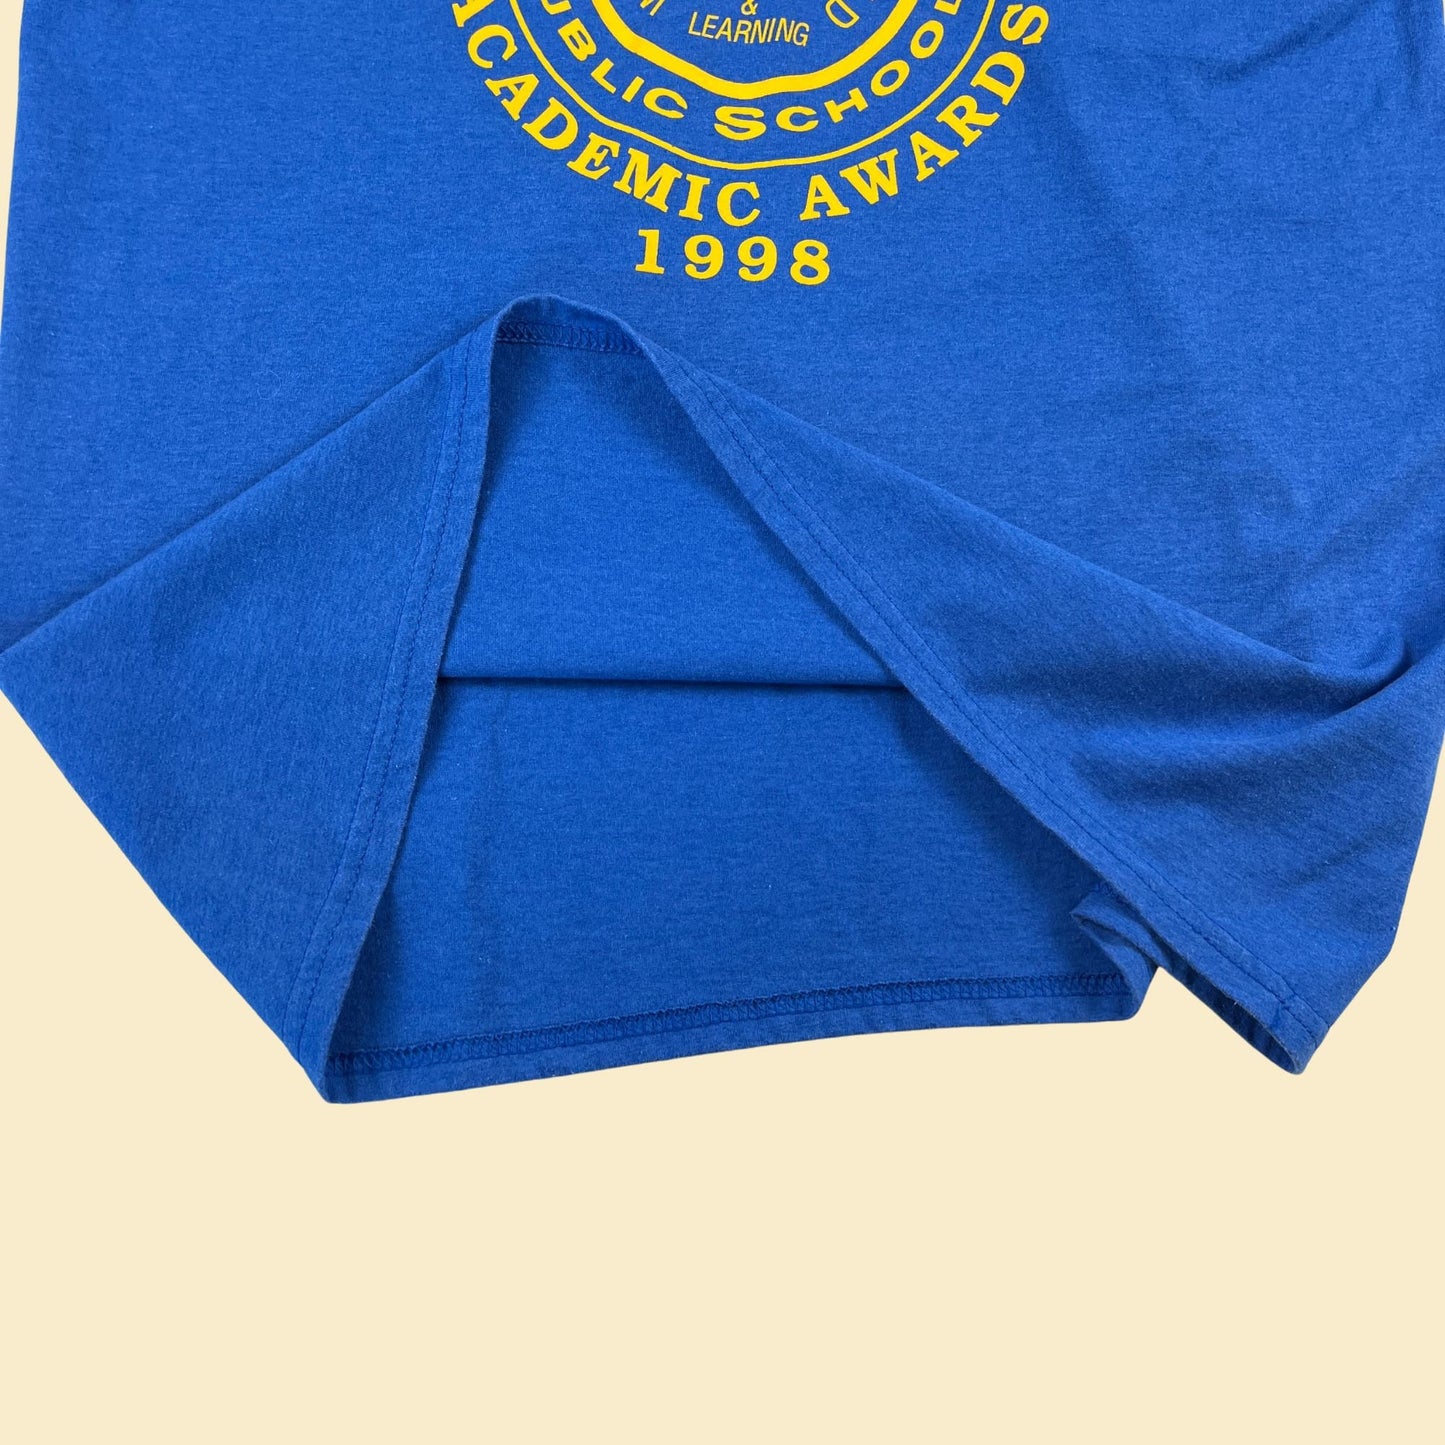 1998 New Orleans Public School T-shirt, vintage 90s New Orleans Superintendent's Academic Awards tee, blue & yellow XL shirt